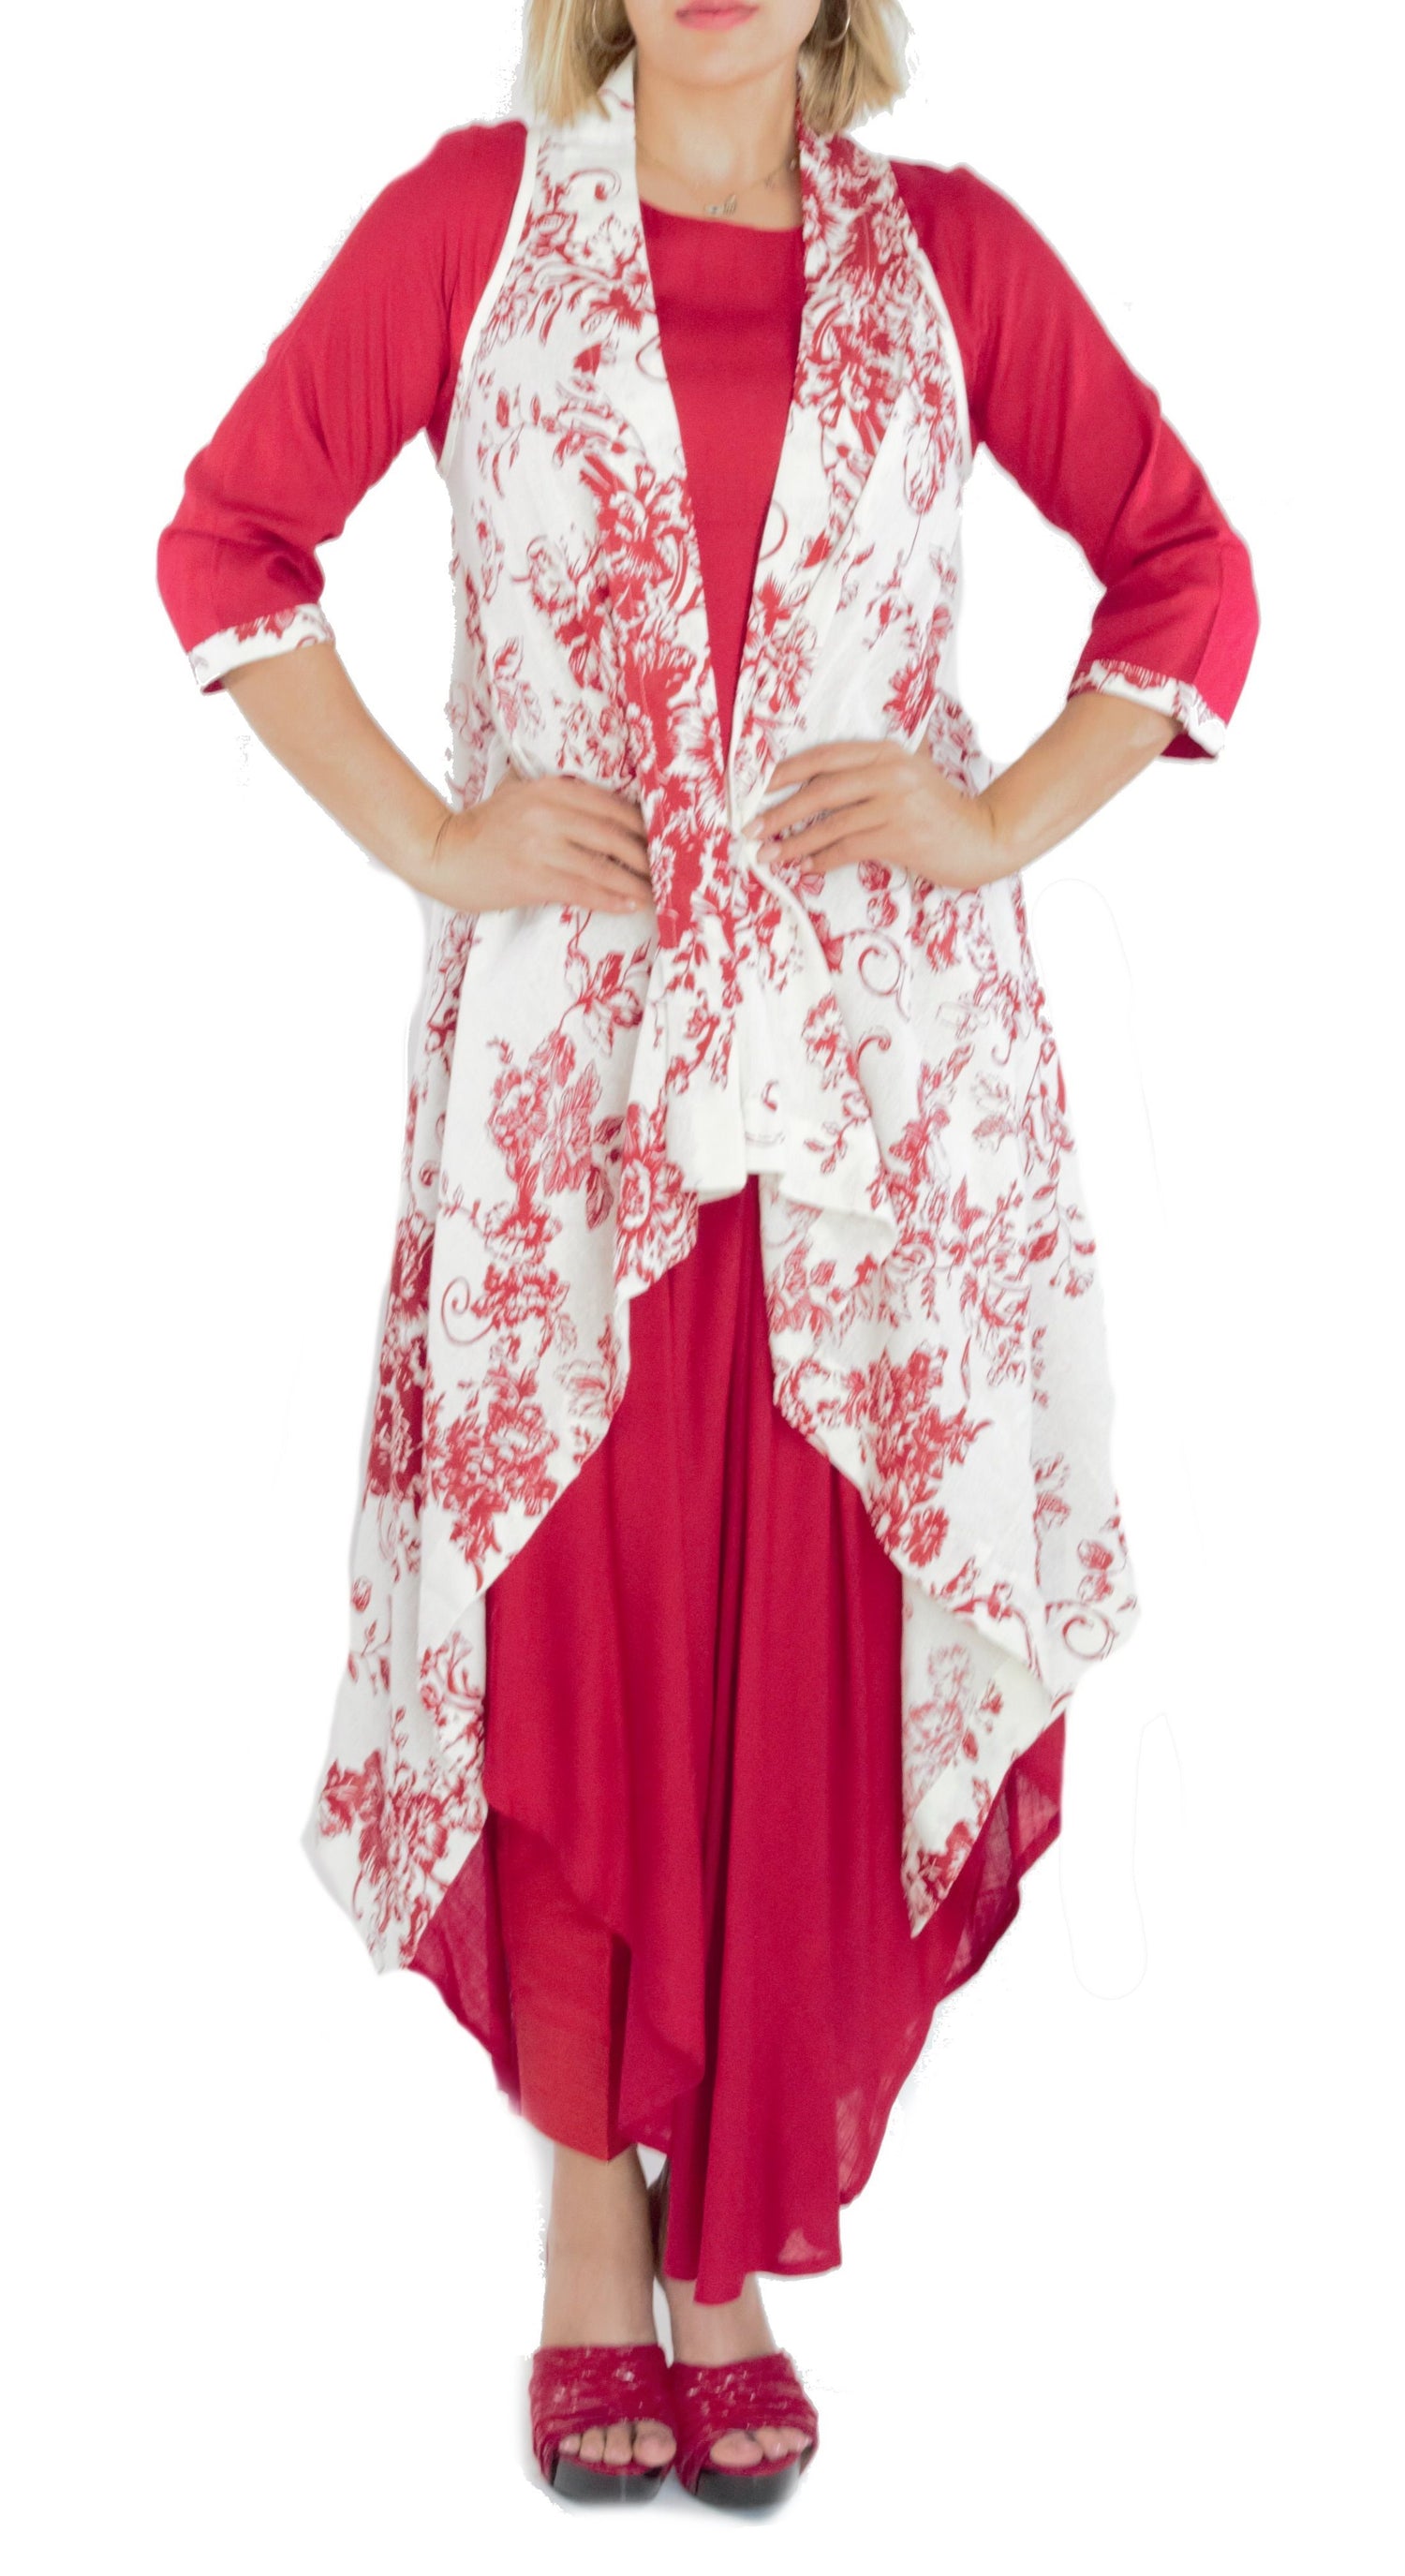 Red Color Kurti with Red and Red Color Floral Print on White Jacket